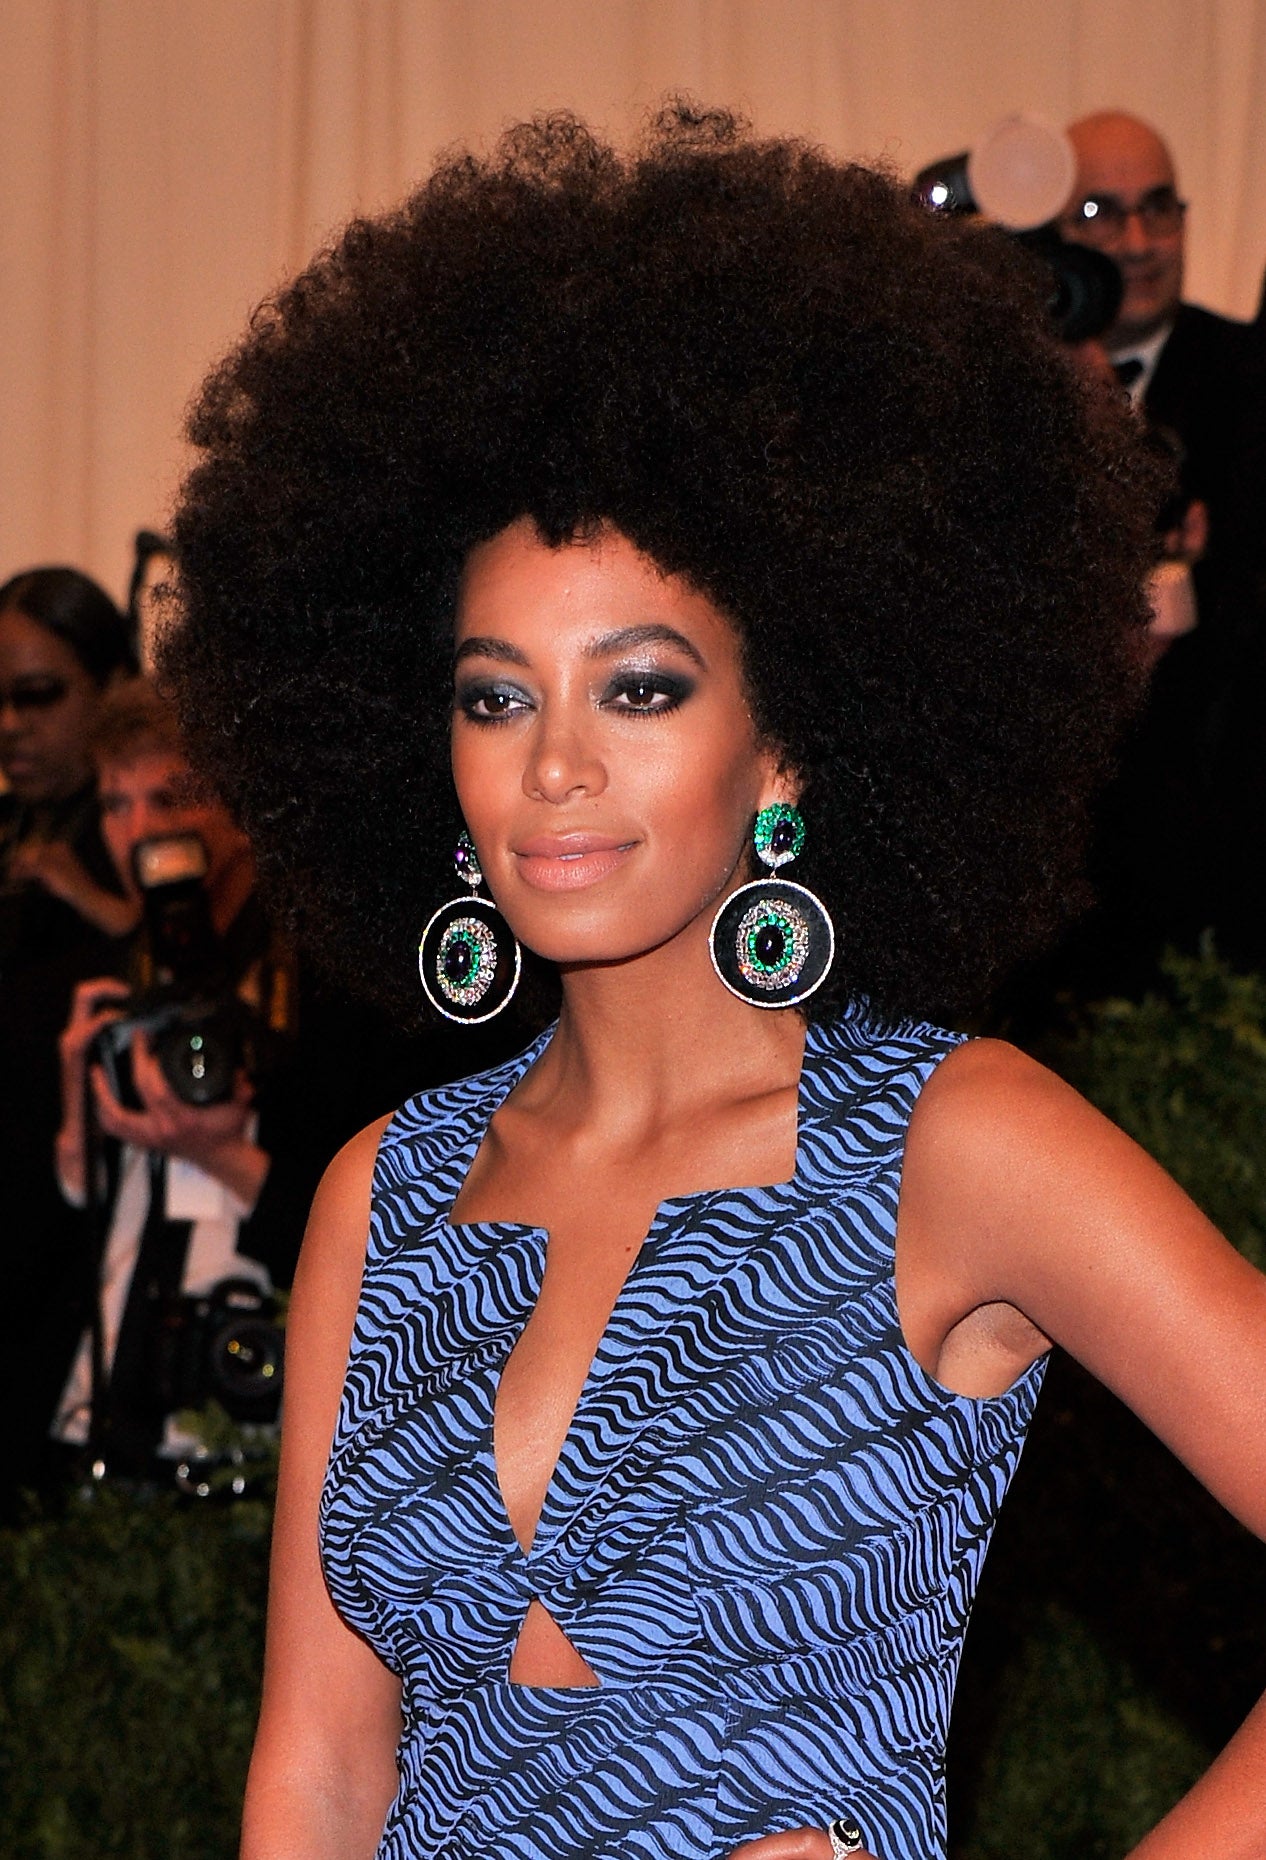 Solange’s Top 10 Hair Moments of 2013